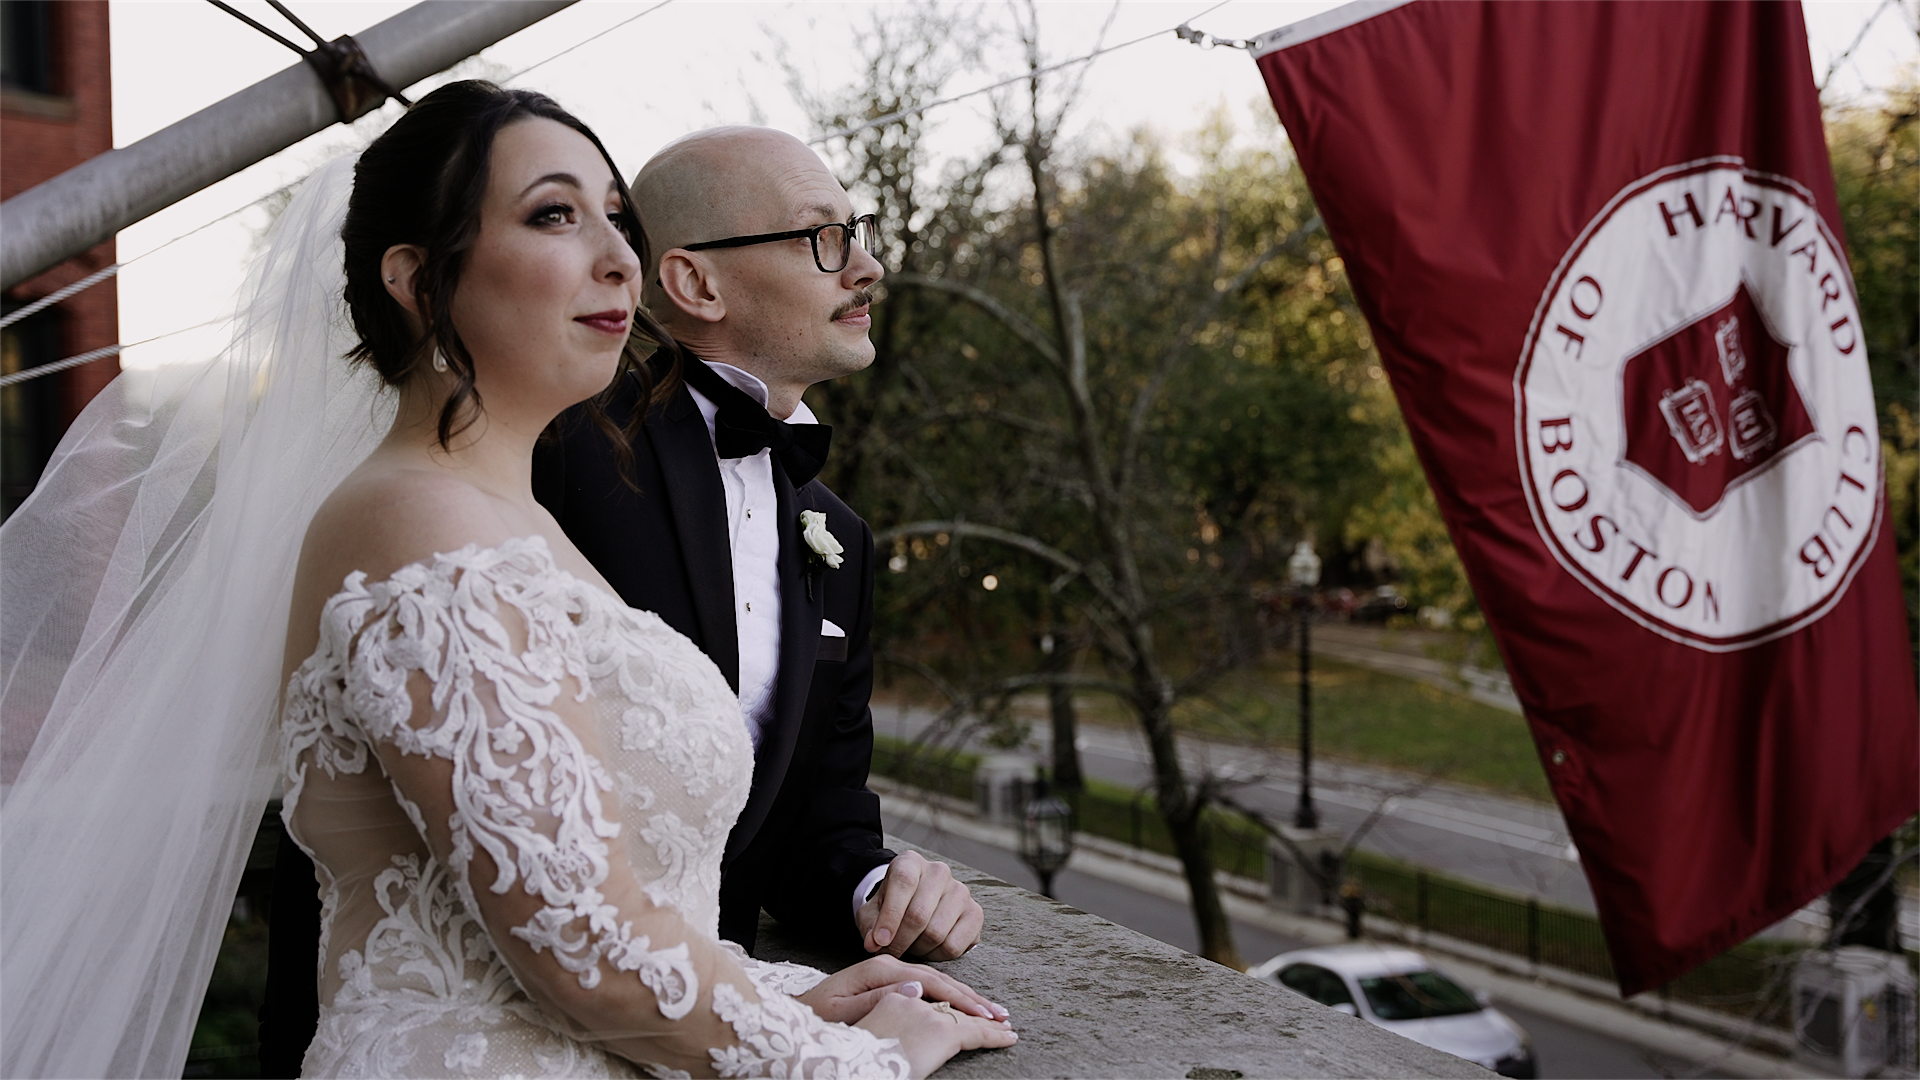 Couple standing on a balcony. The Bride wearing an over-the-shoulder long-sleeved lace dress and a veil and has both hands on the stone railing. Groom is wearing a black tuxedo and is leaning his forearm on the railing. On the right is a maroon-colored flag with a white circle. In the white circle is a maroon insignia and the words "Harvard Club Of Boston" You can see Commonwealth Ave below